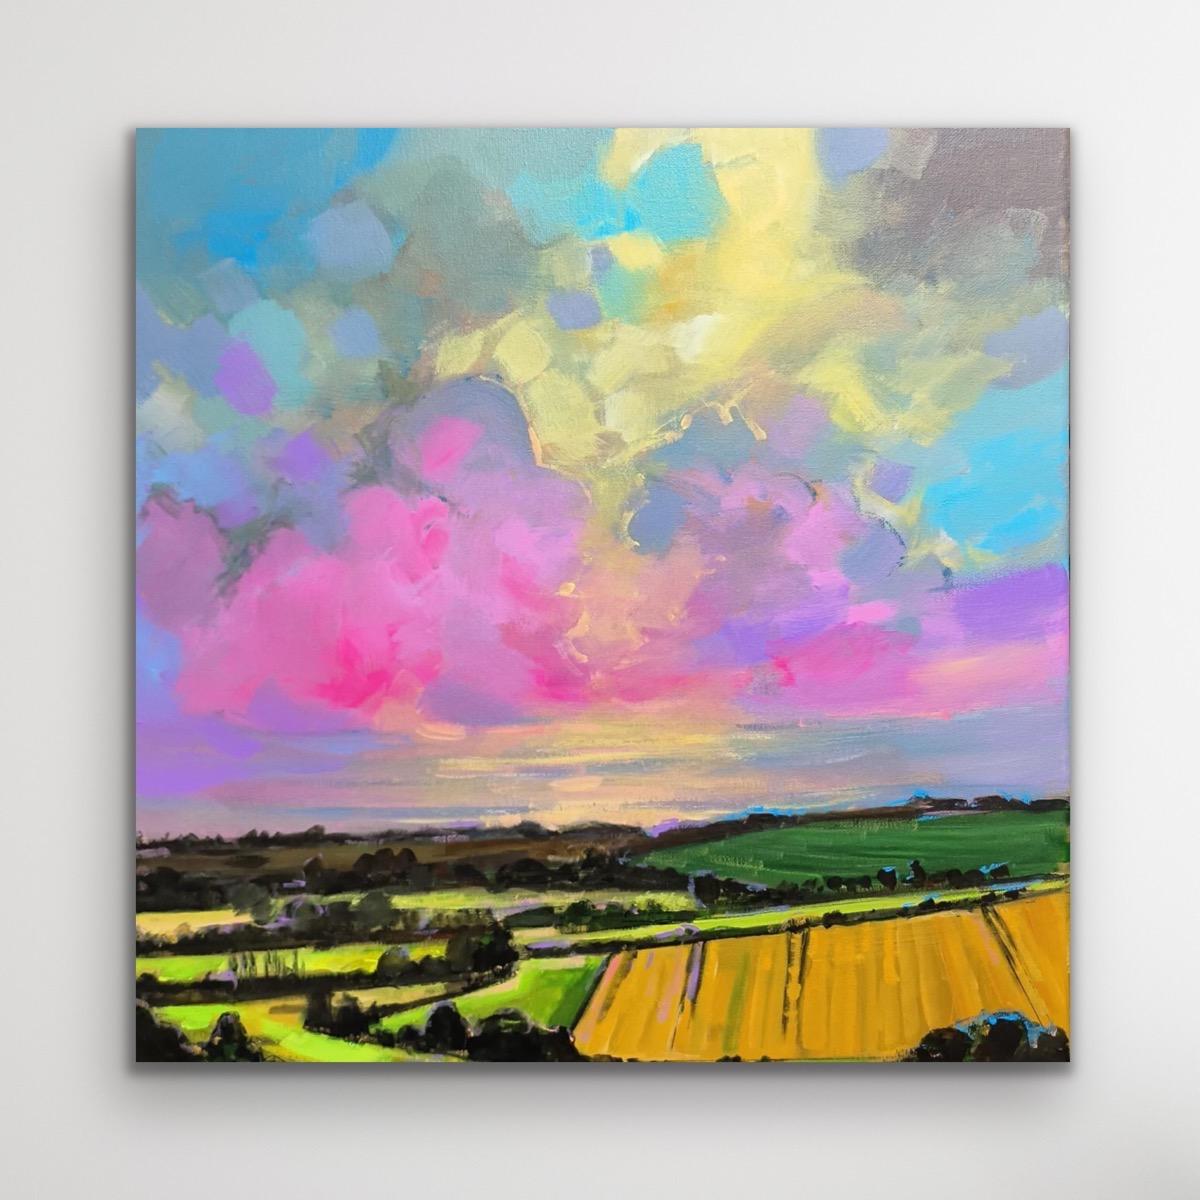 Chadlington in the Summer, Cotswolds, Original painting, Countryside, Rural - Gray Landscape Painting by Kris McKinnon